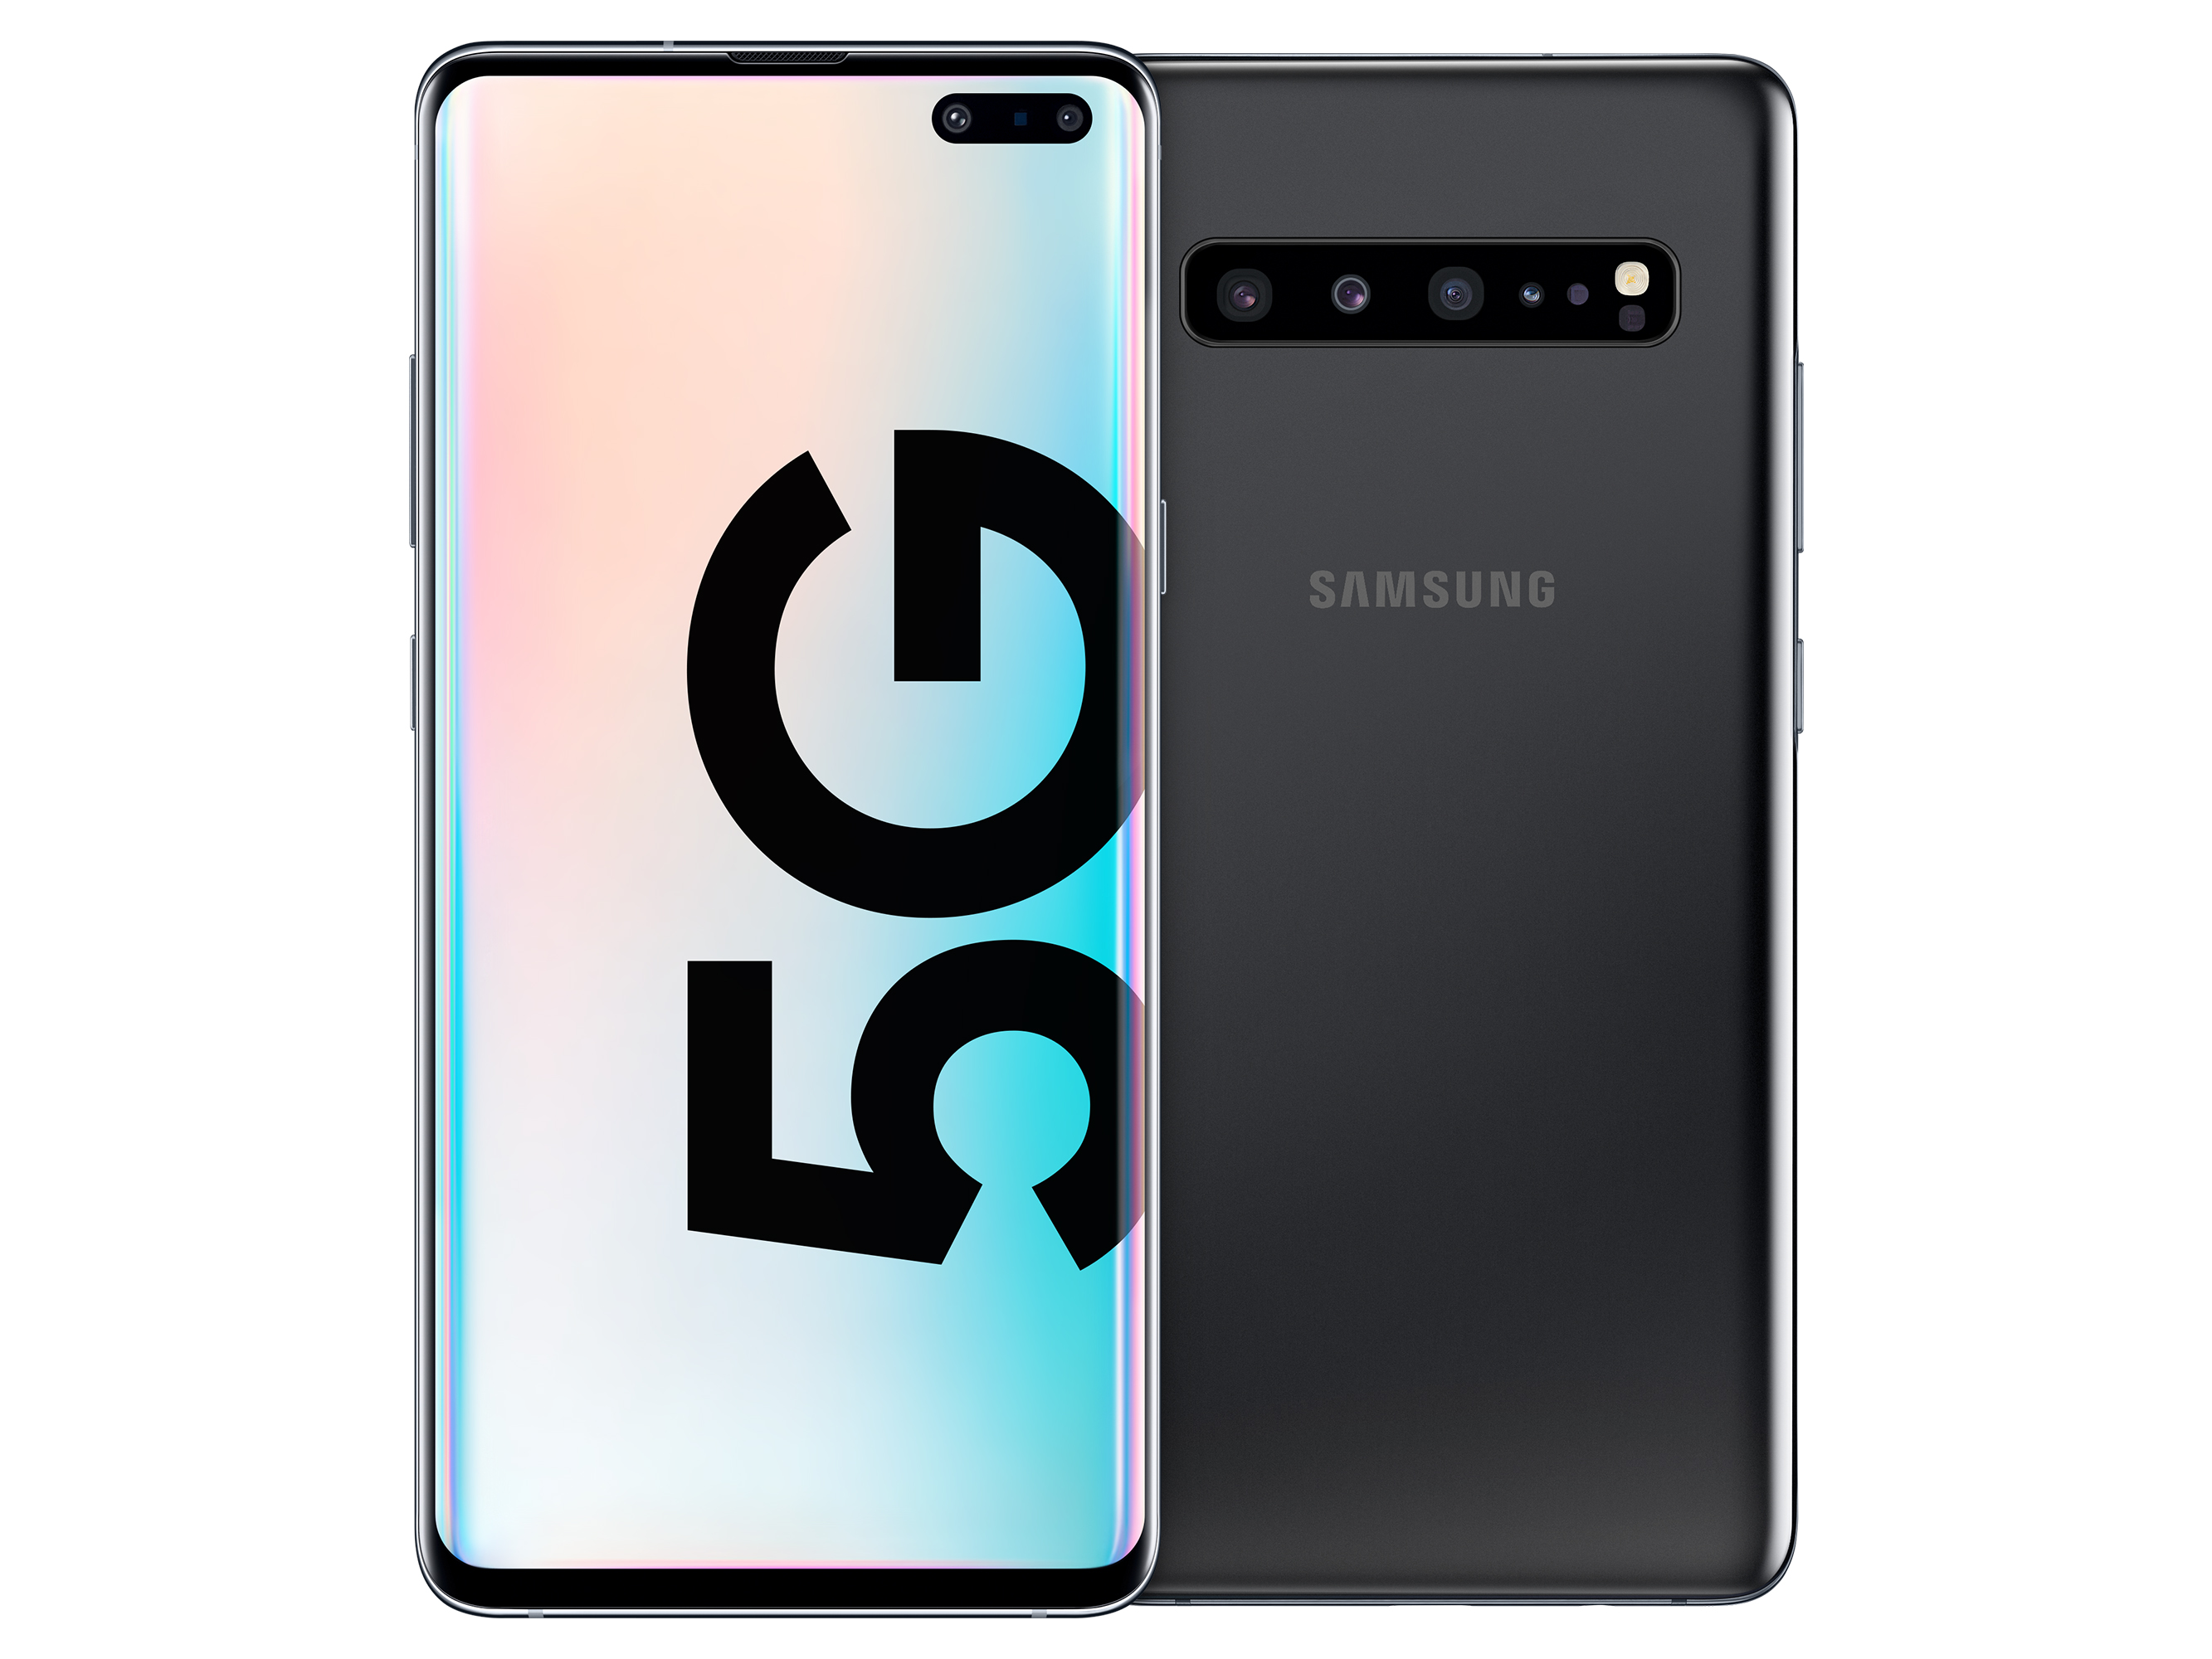 Samsung Galaxy S10 5G Smartphone Review: A turbocharged S10 with a ...